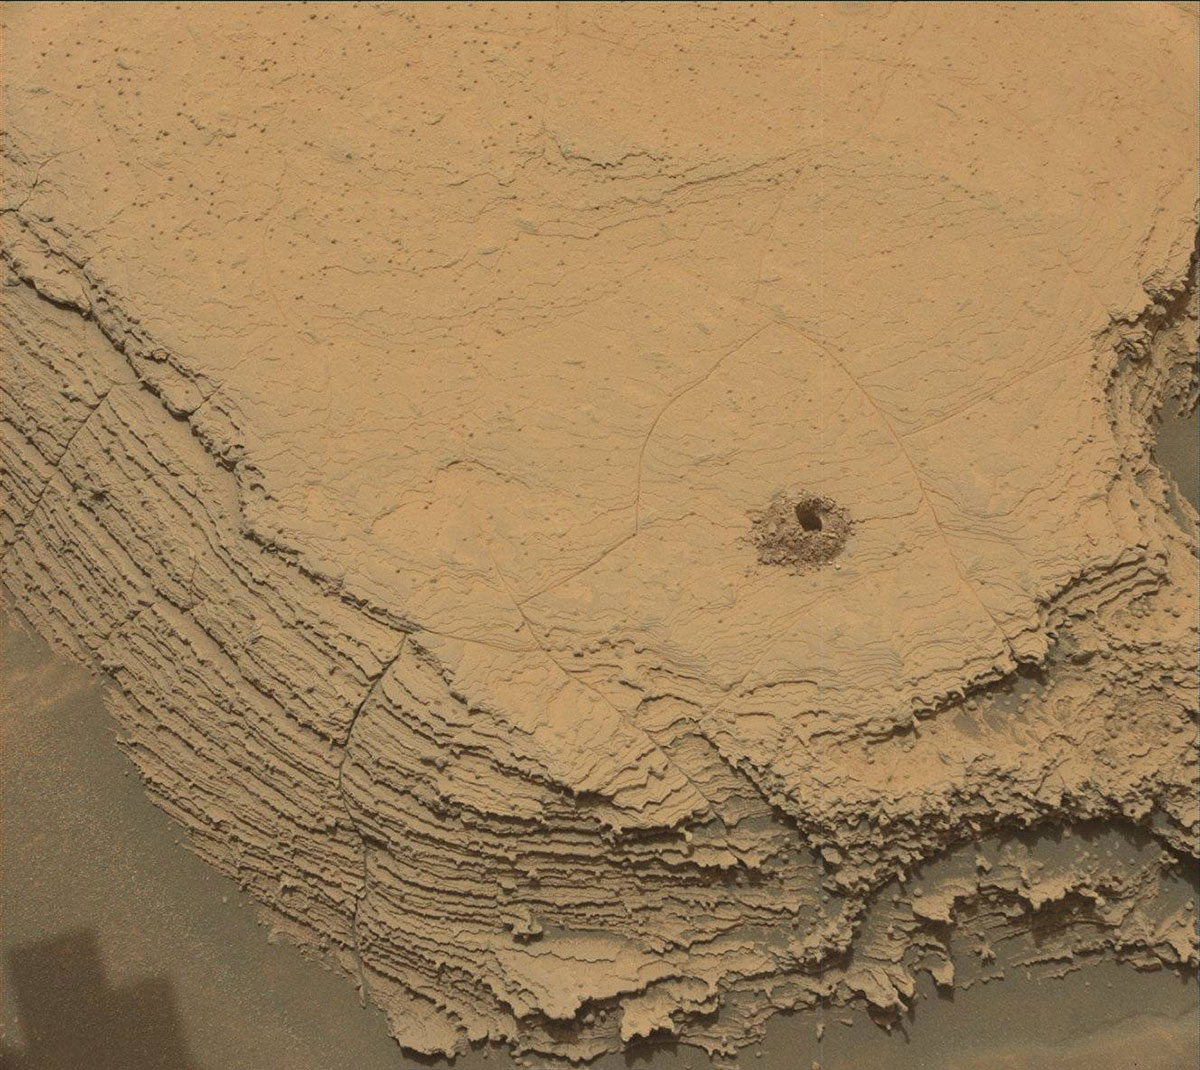 Curiosity used its Mast Camera, or Mastcam, to capture this image of its 36th successful drill hole on Mount Sharp, at a rock called “Canaima.” The rovers Mars Hand Lens Imager took the inset image.